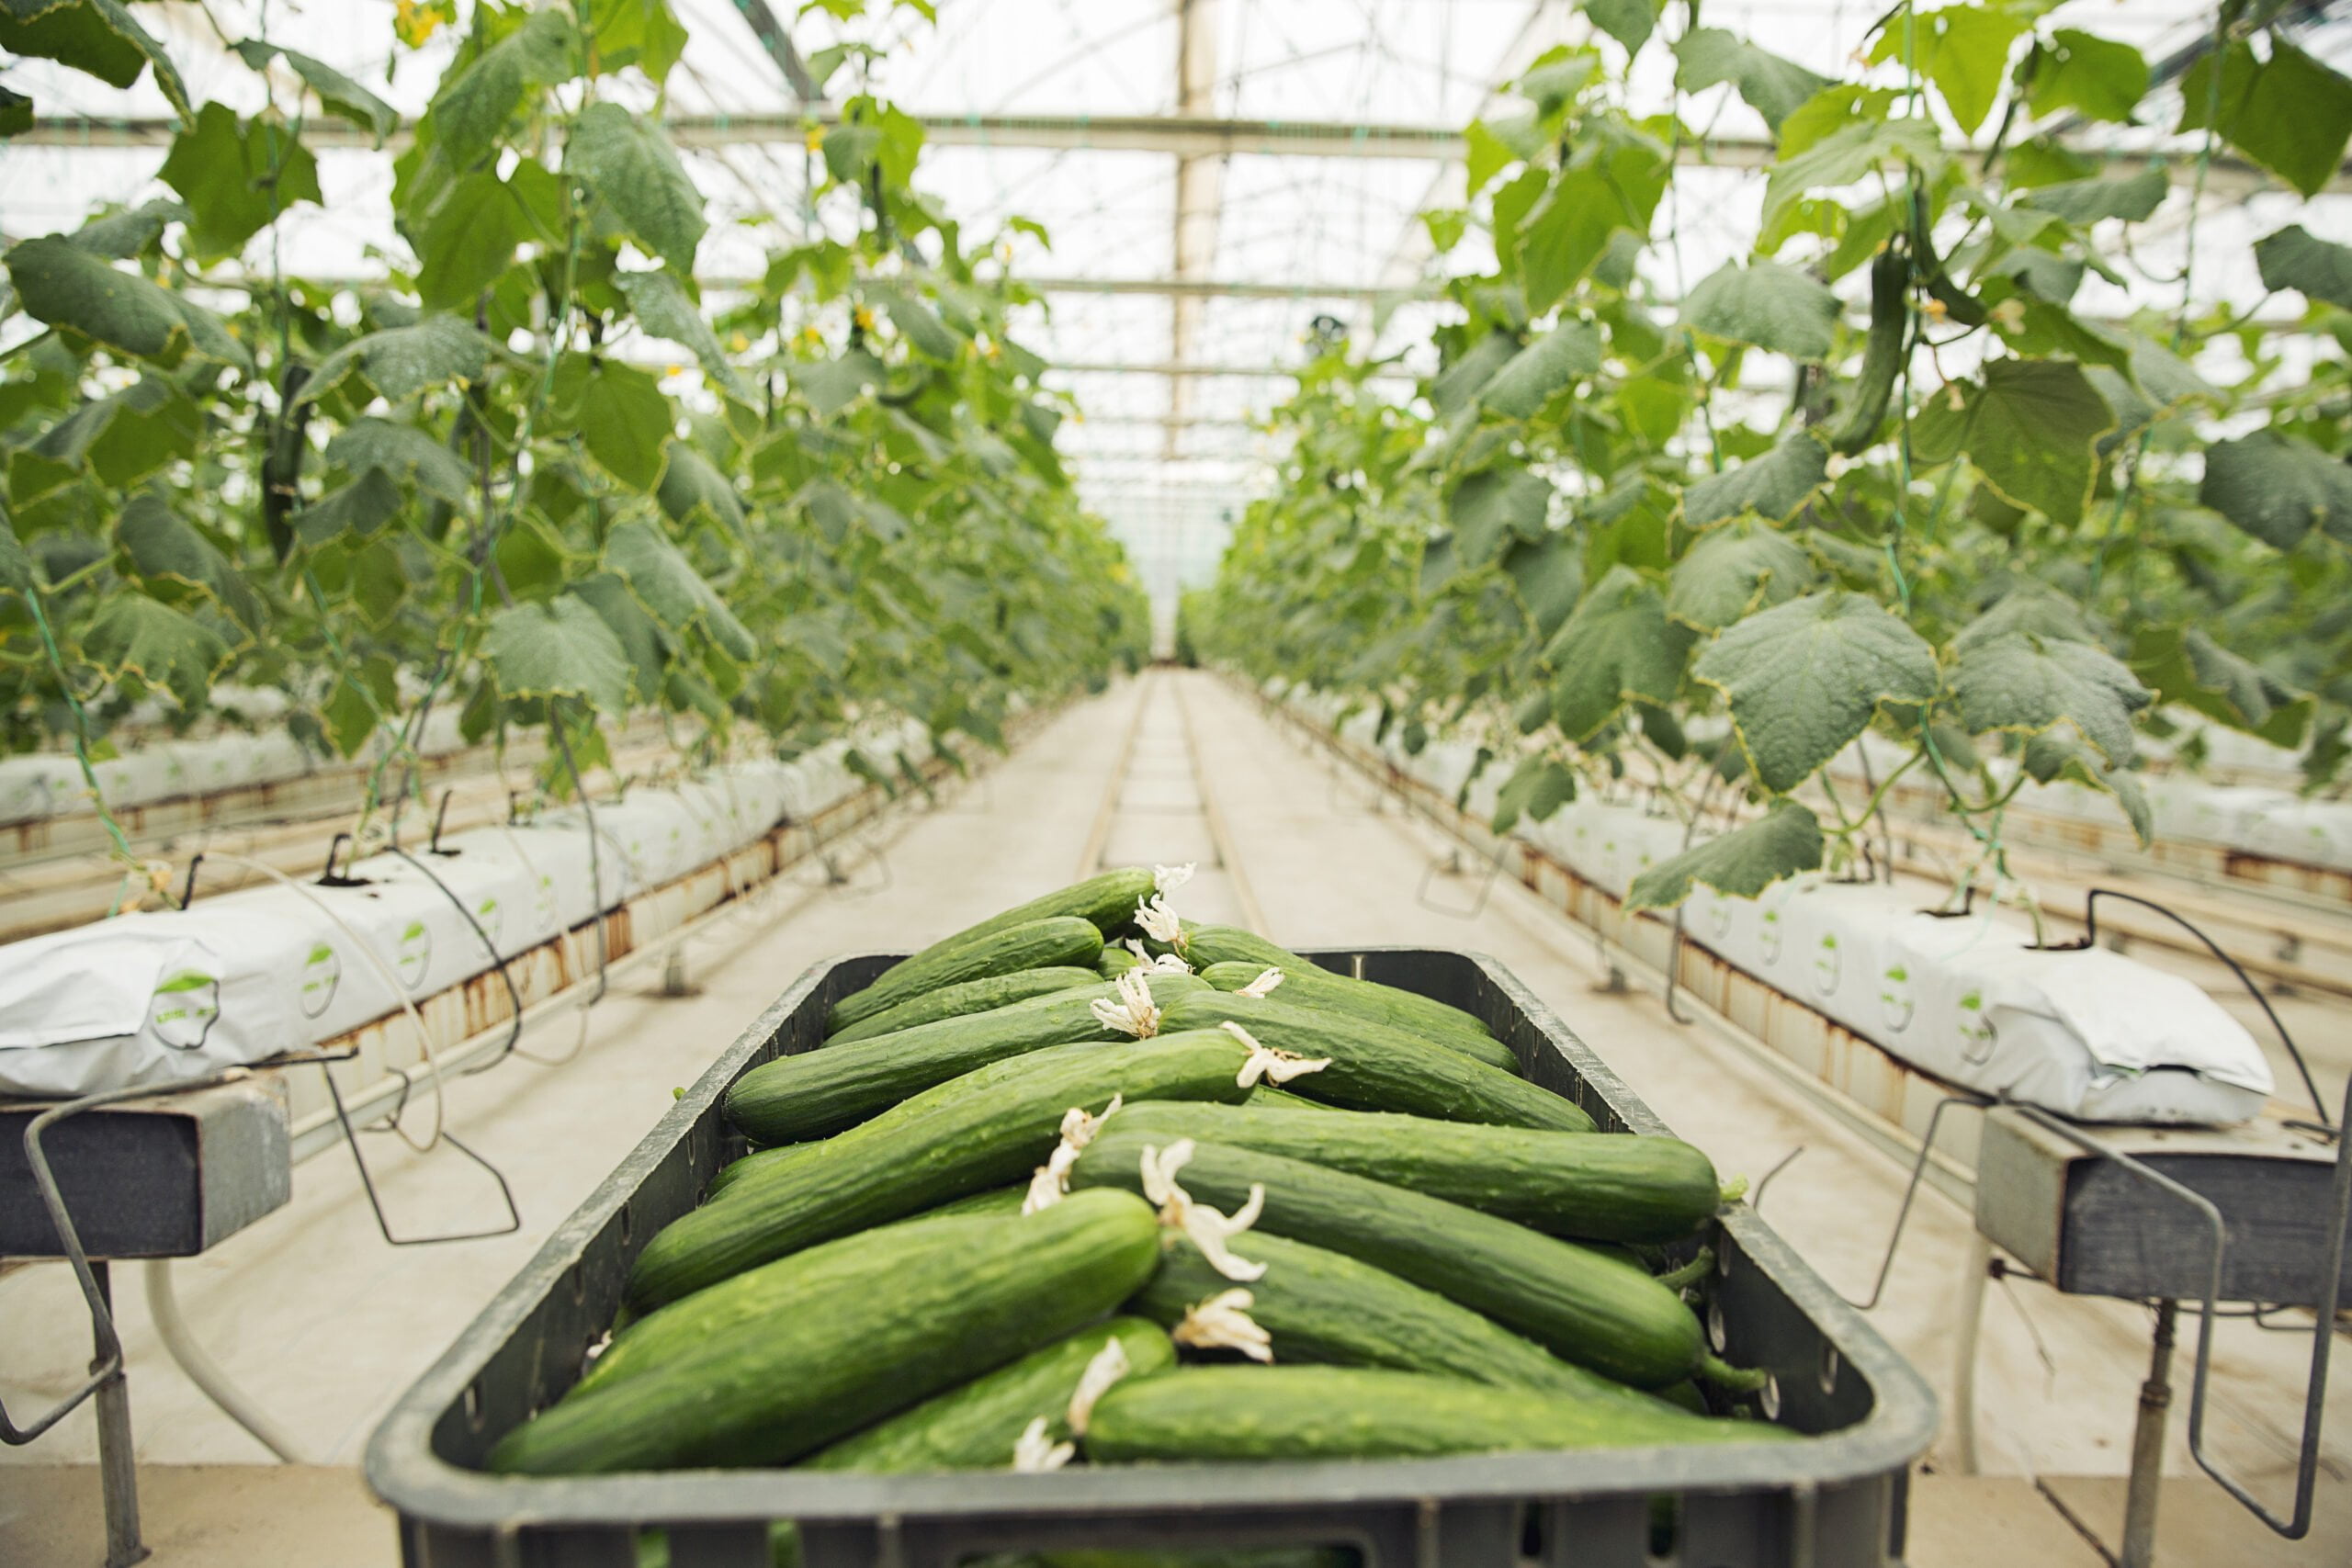 fresh-cucumber-gathered-into-plastic-box-from-greenhouse-plants